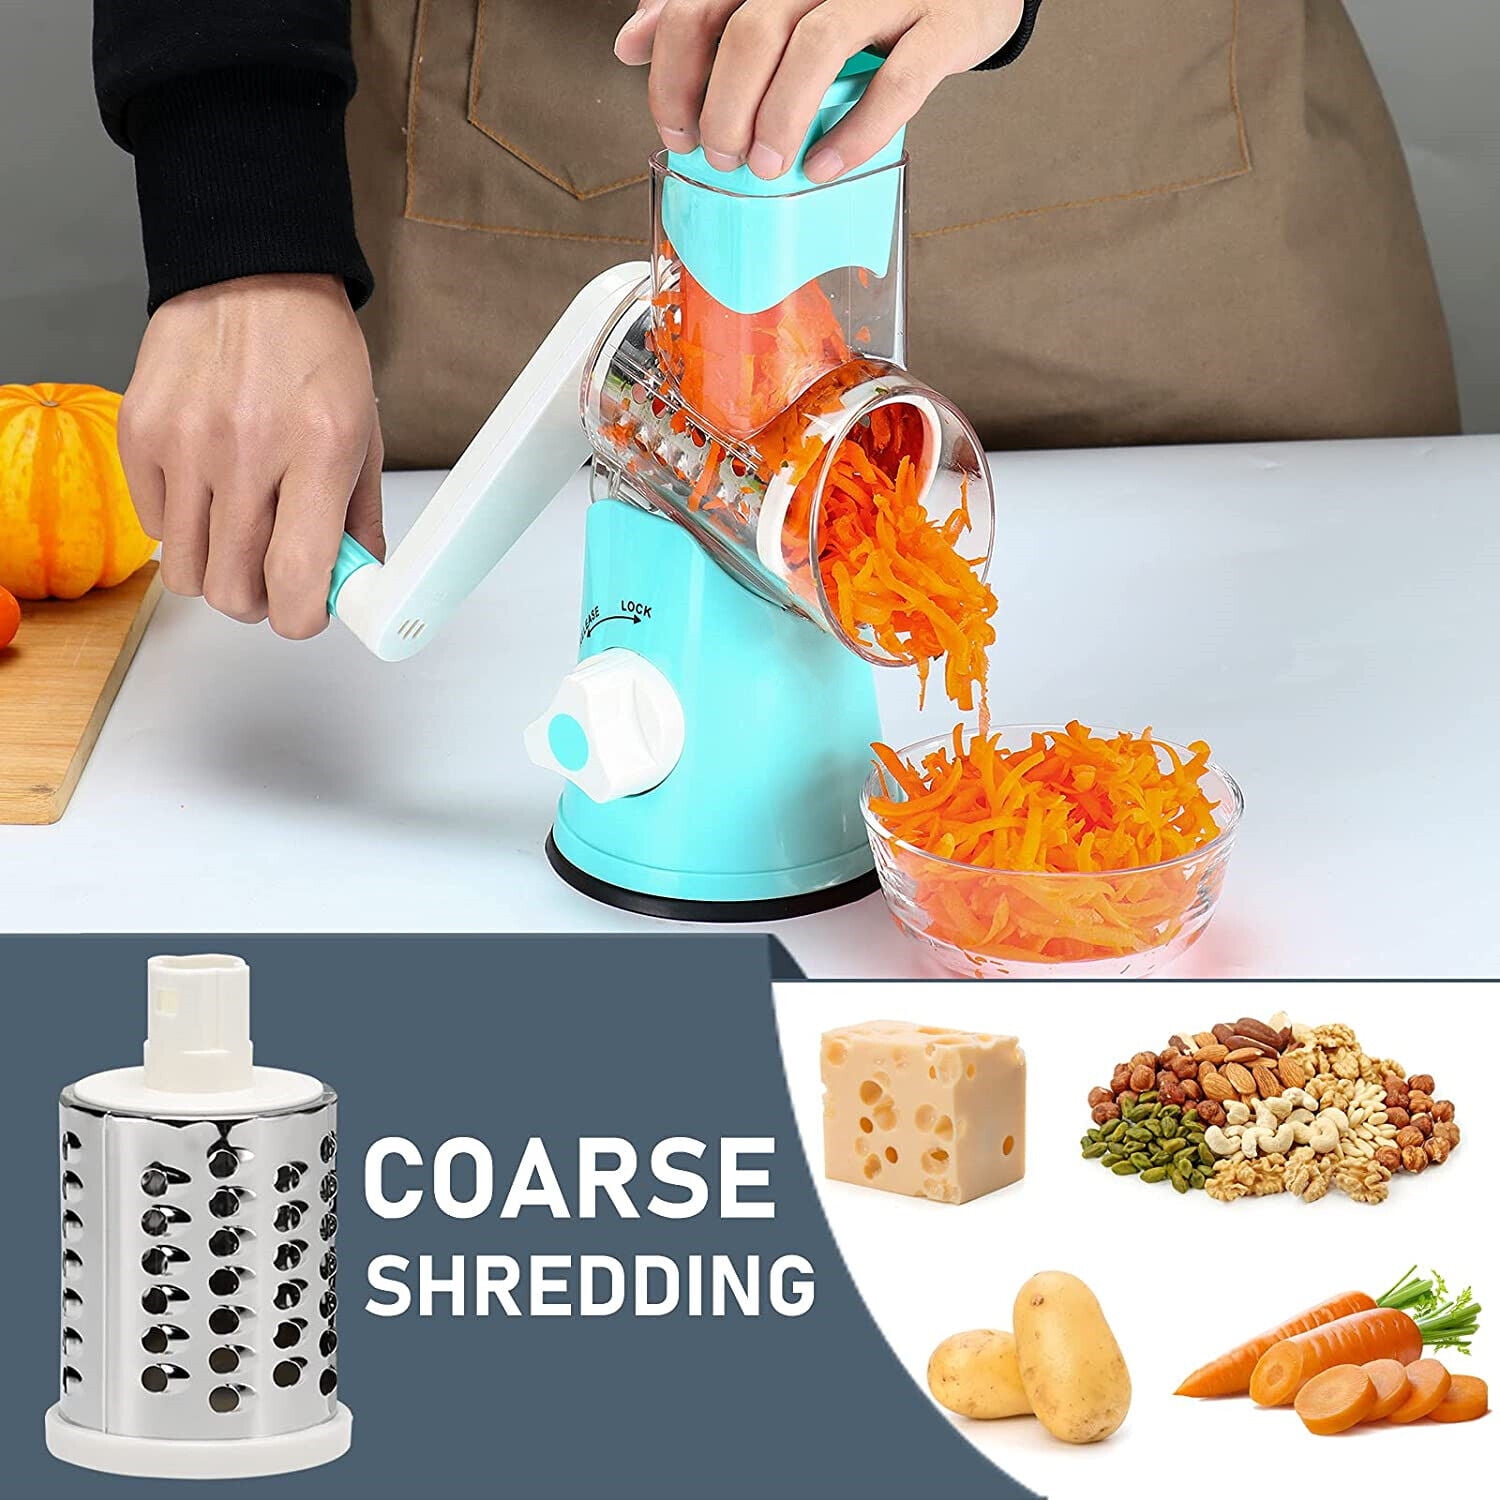 Rotary Cheese Grater - Khmer Kitchen Handheld Cheese Grater With Handle,  Veggie Shredder Nut Mill Grinder, 3 Interchangeable Stainless Steel Drums,  And Powerful Suction Base With Free Cleaning Brush